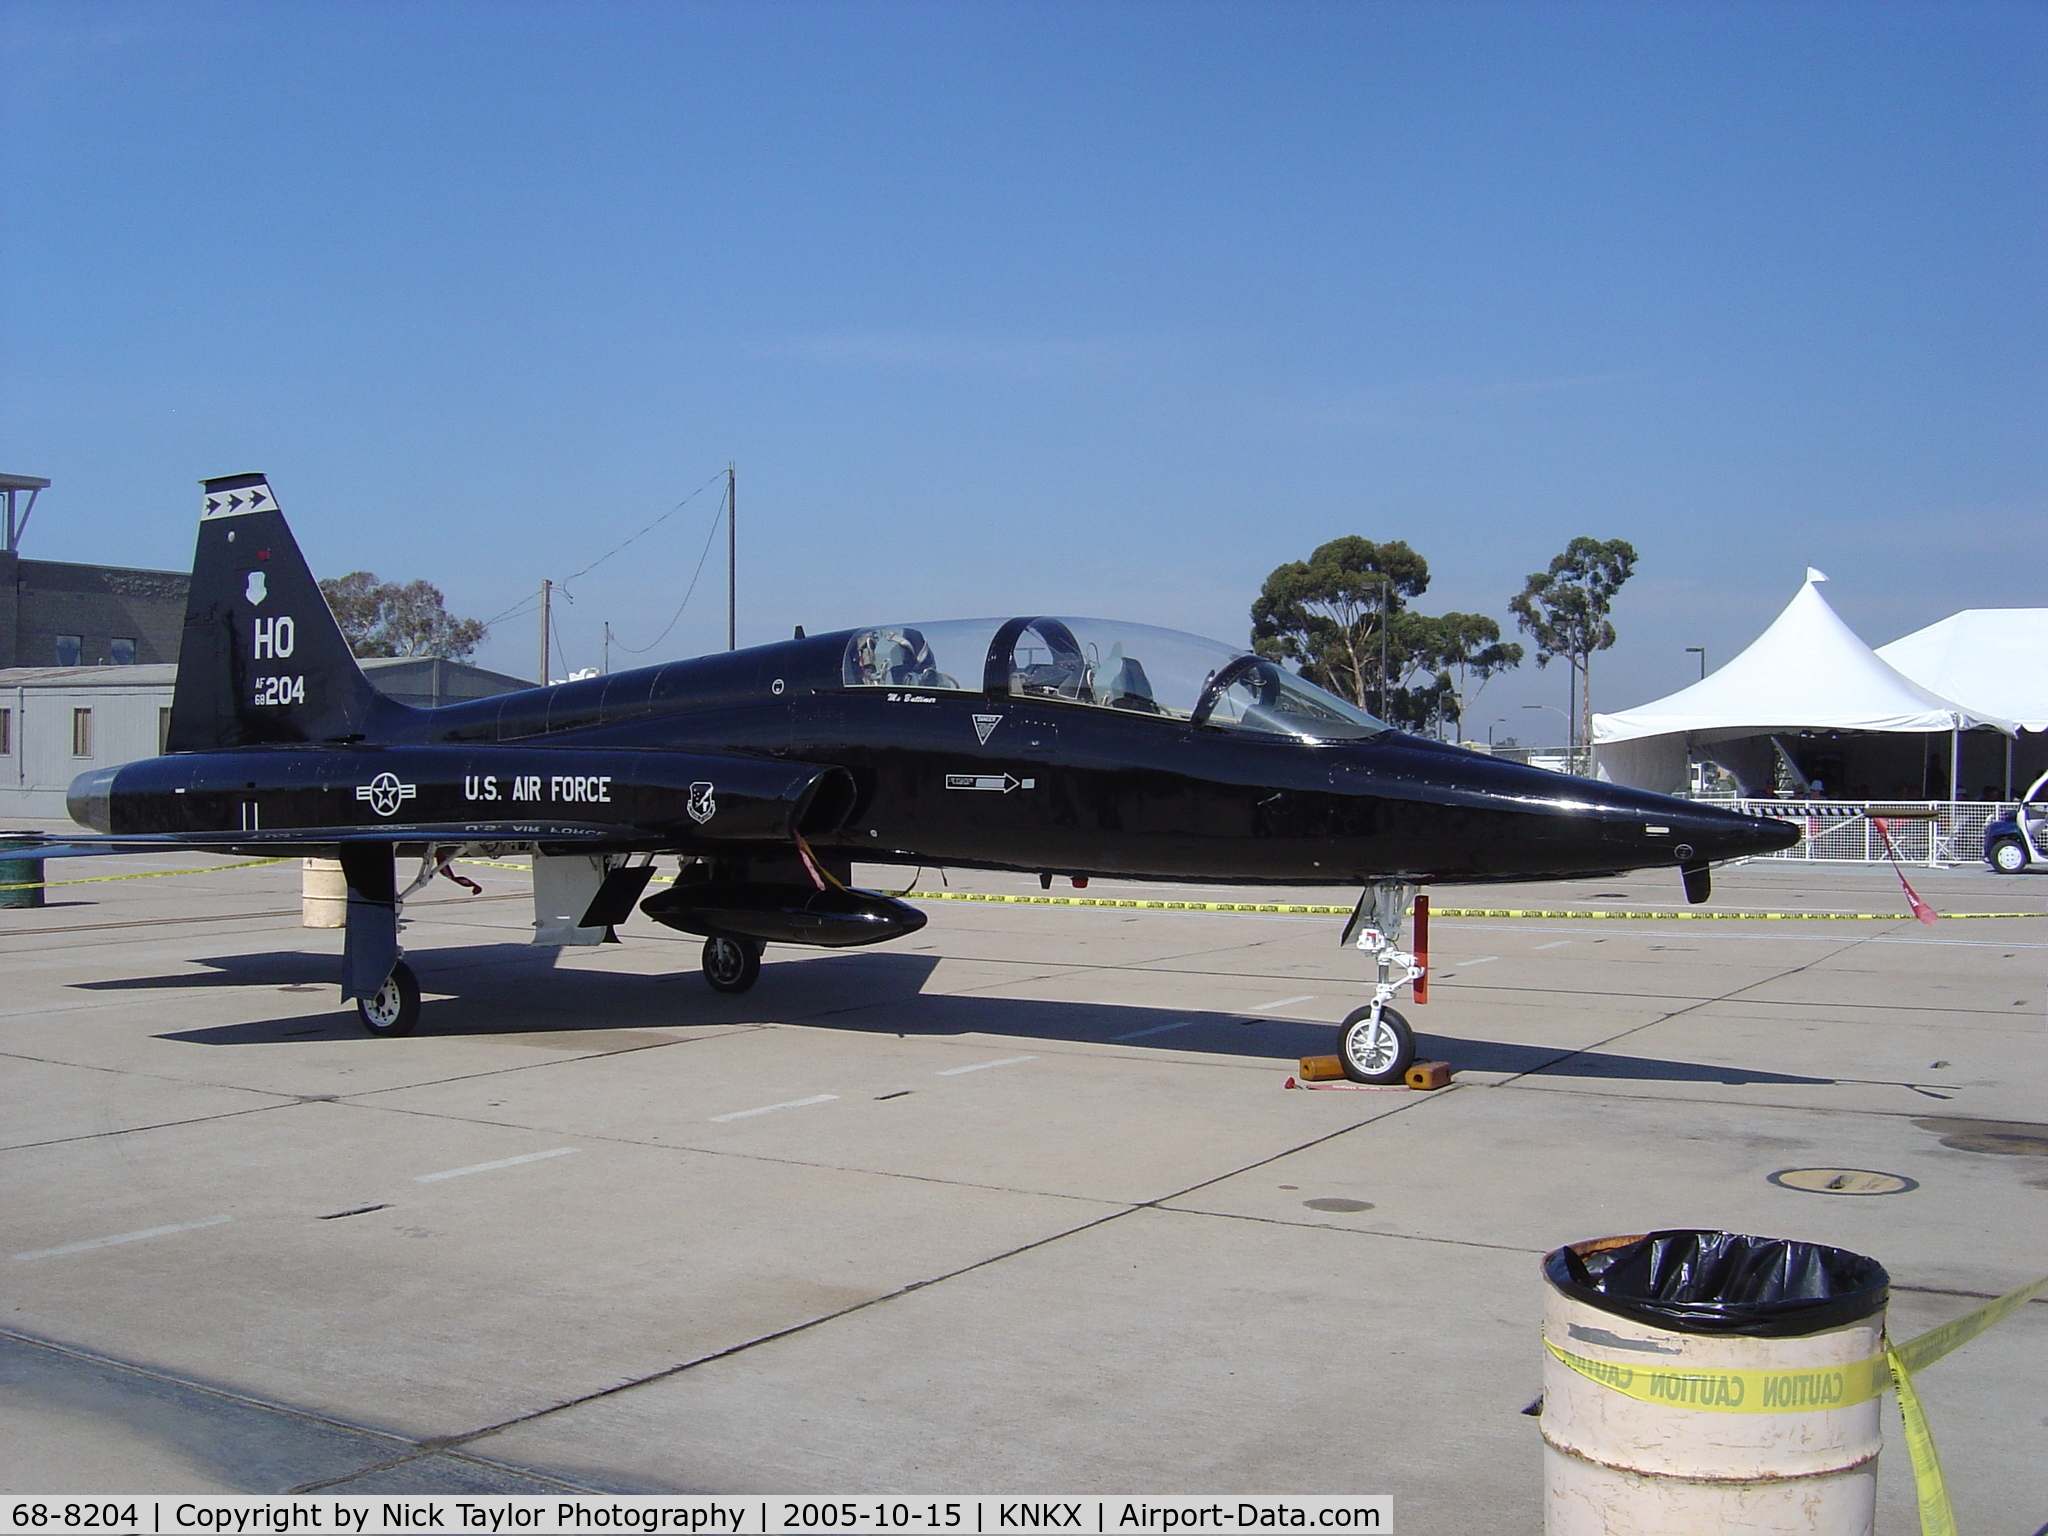 68-8204, 1968 Northrop T-38A Talon C/N T.6207, On display at the MCAS Miramar Airshow. This aircraft is used to train/evaluate F-117 pilots from Holloman AFB in NM.